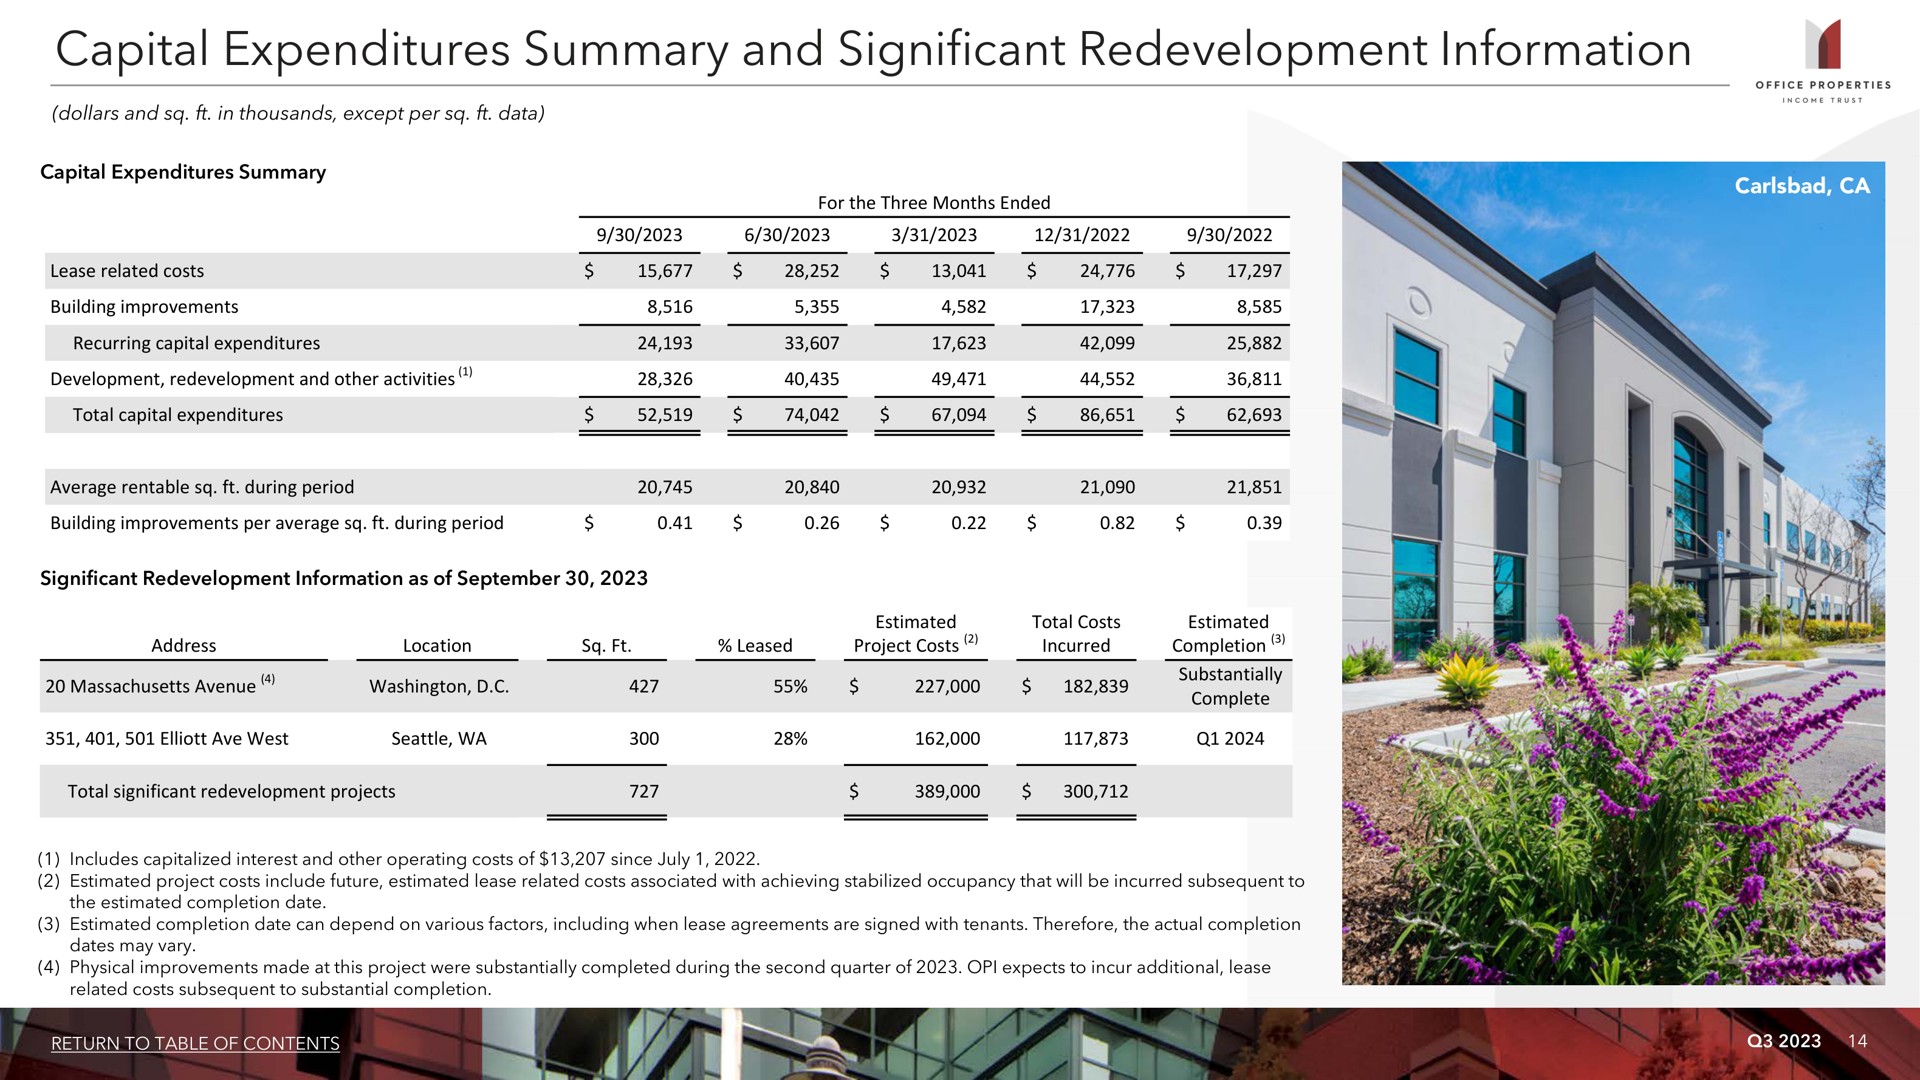 capital expenditures summary and significant redevelopment information i avenue | Office Properties Income Trust